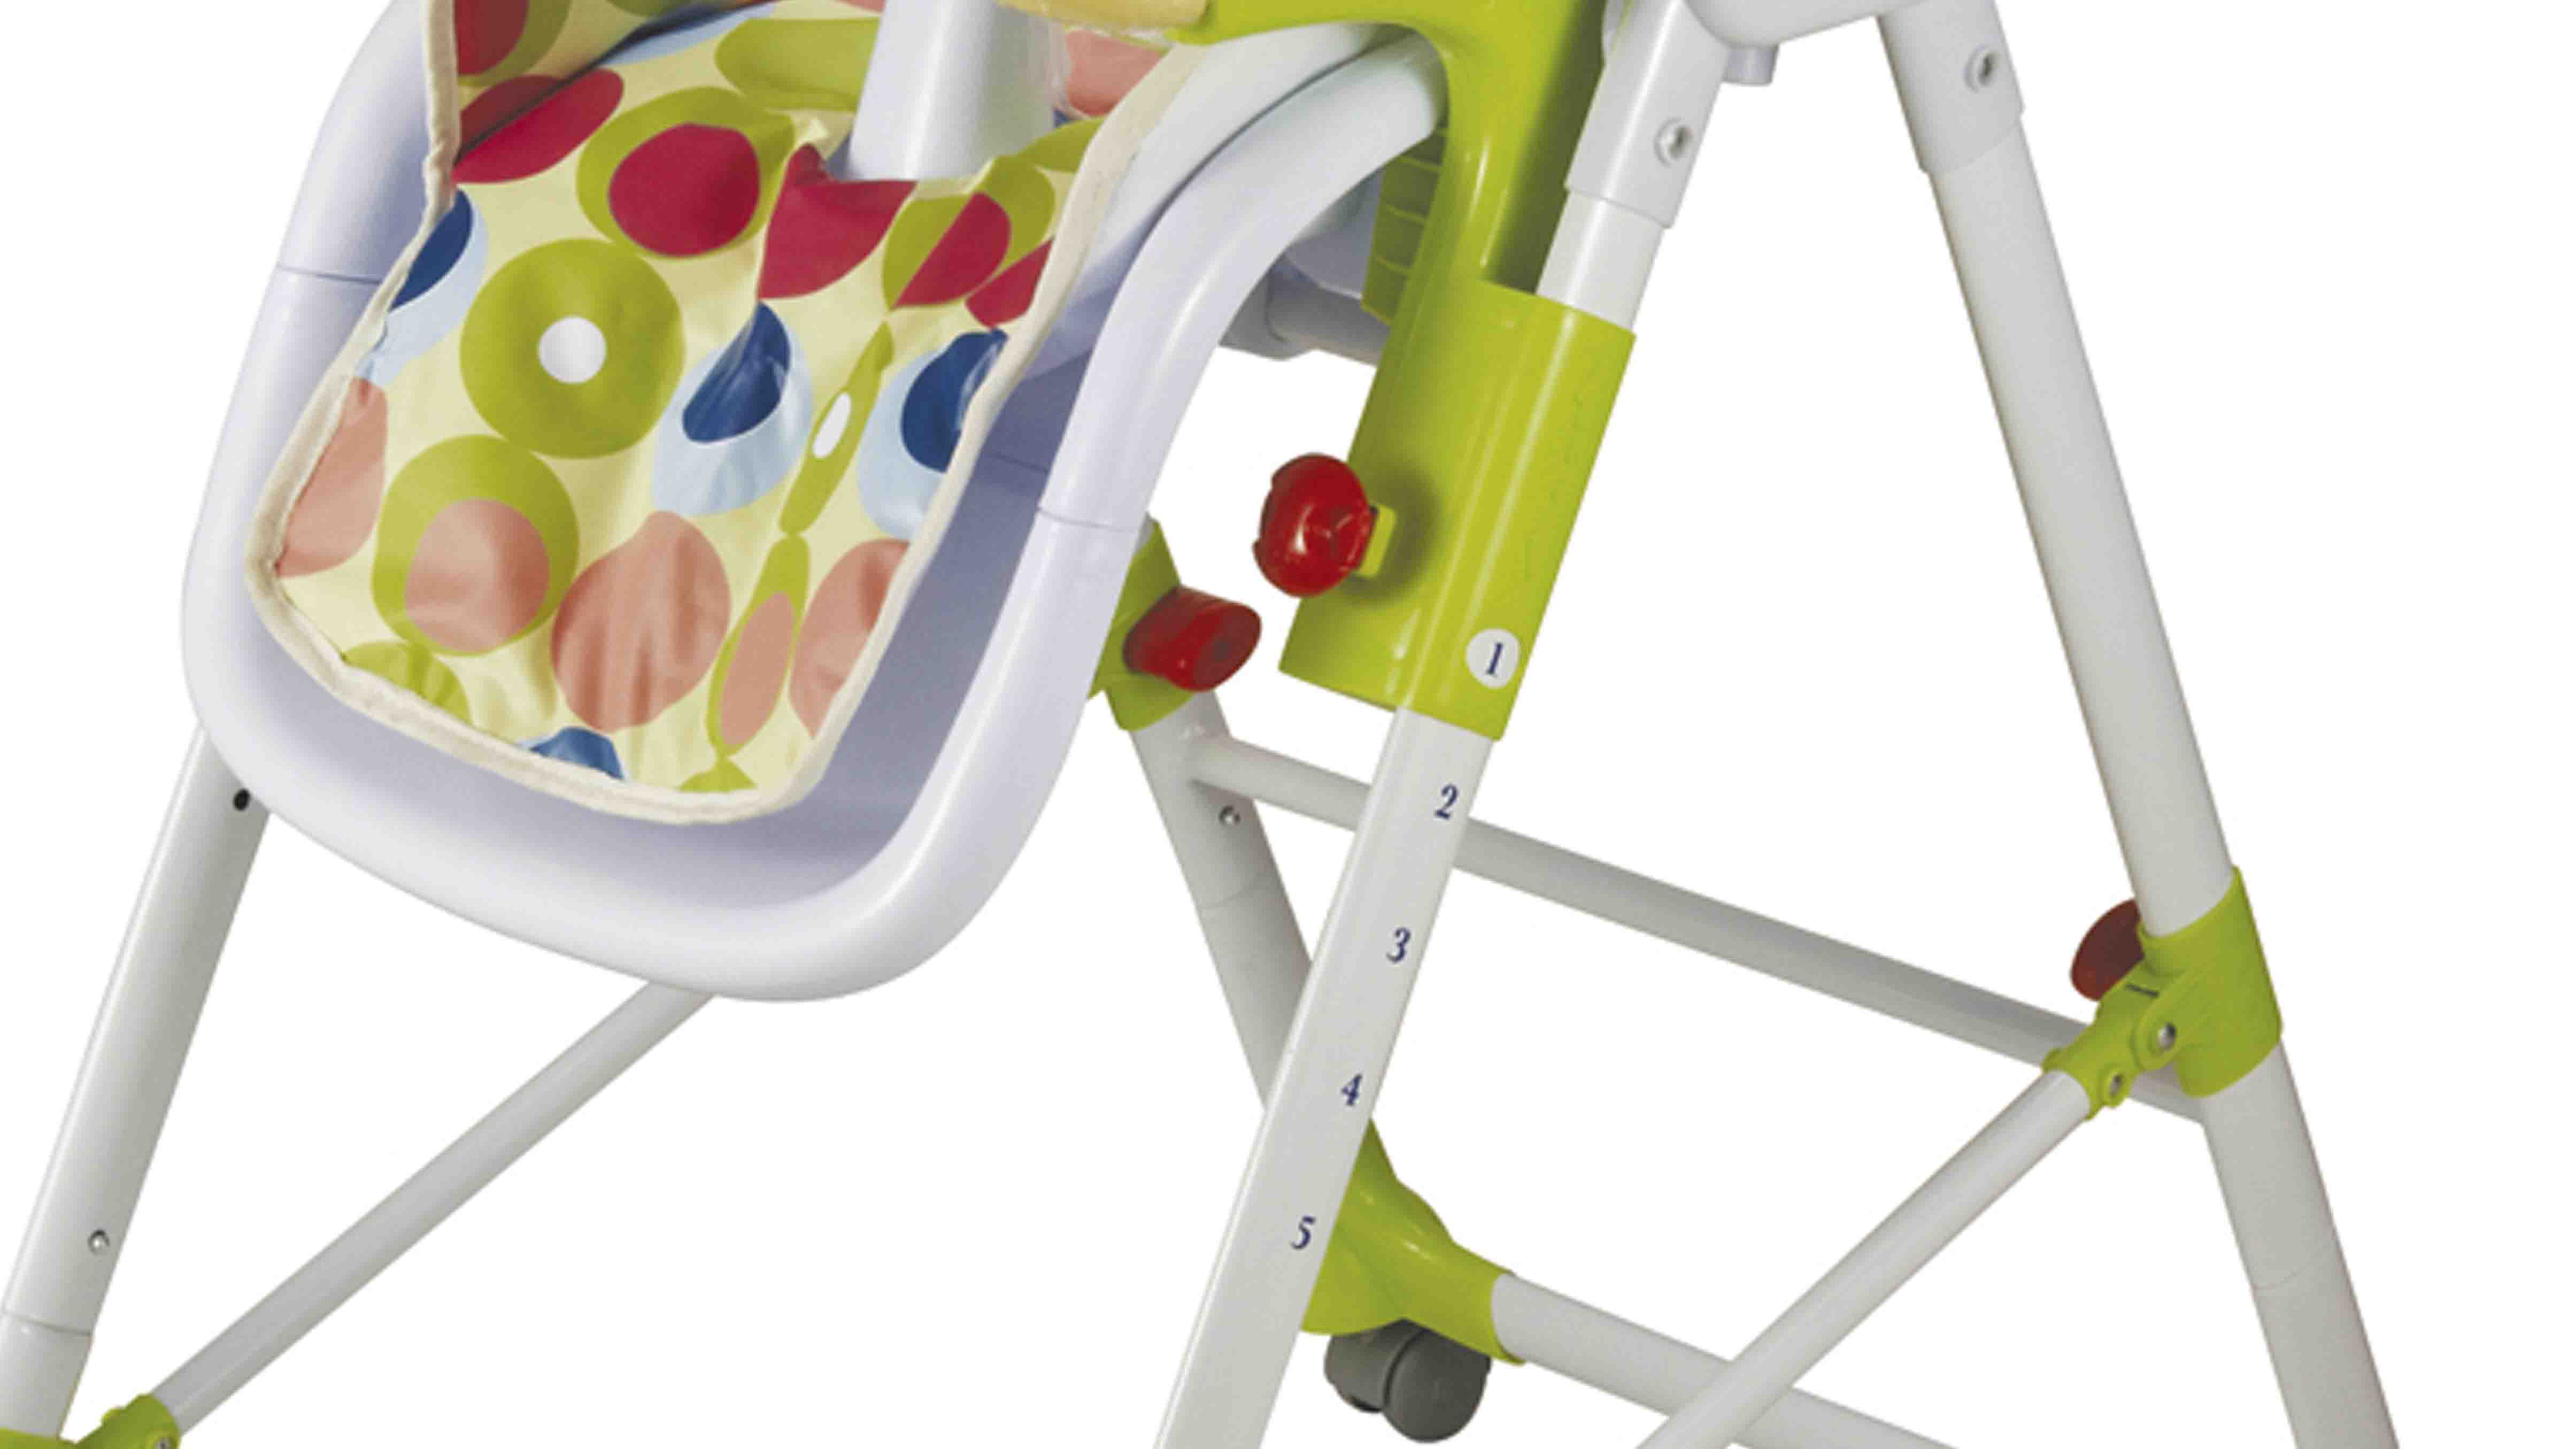 foldable feeding high chair directly sale for infant